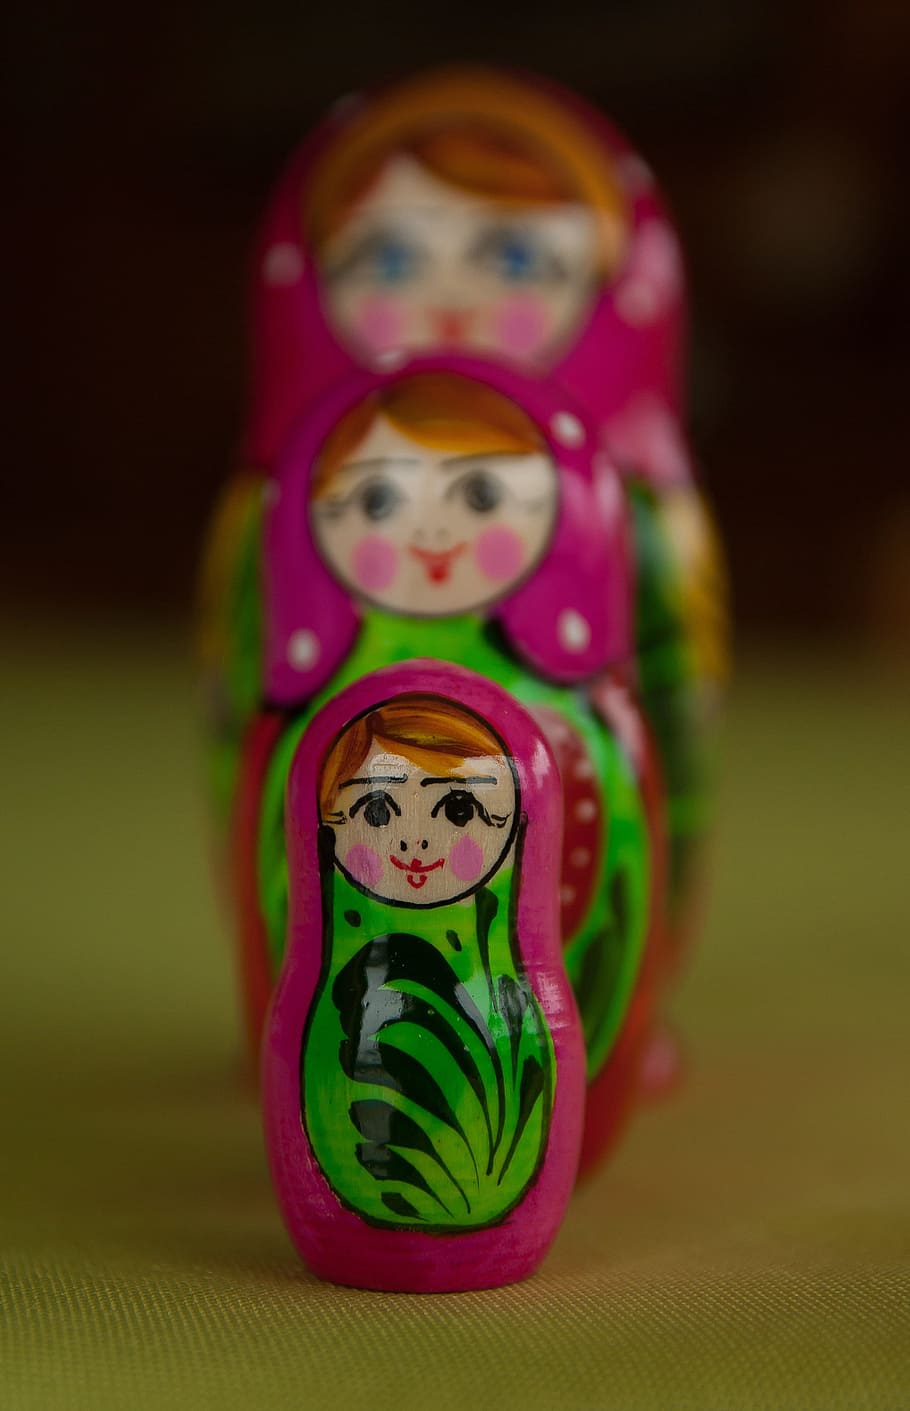 Matryoshka, Russian Dolls, russia, dolls, art and craft, multi colored, indoors, focus on foreground, close-up, representation